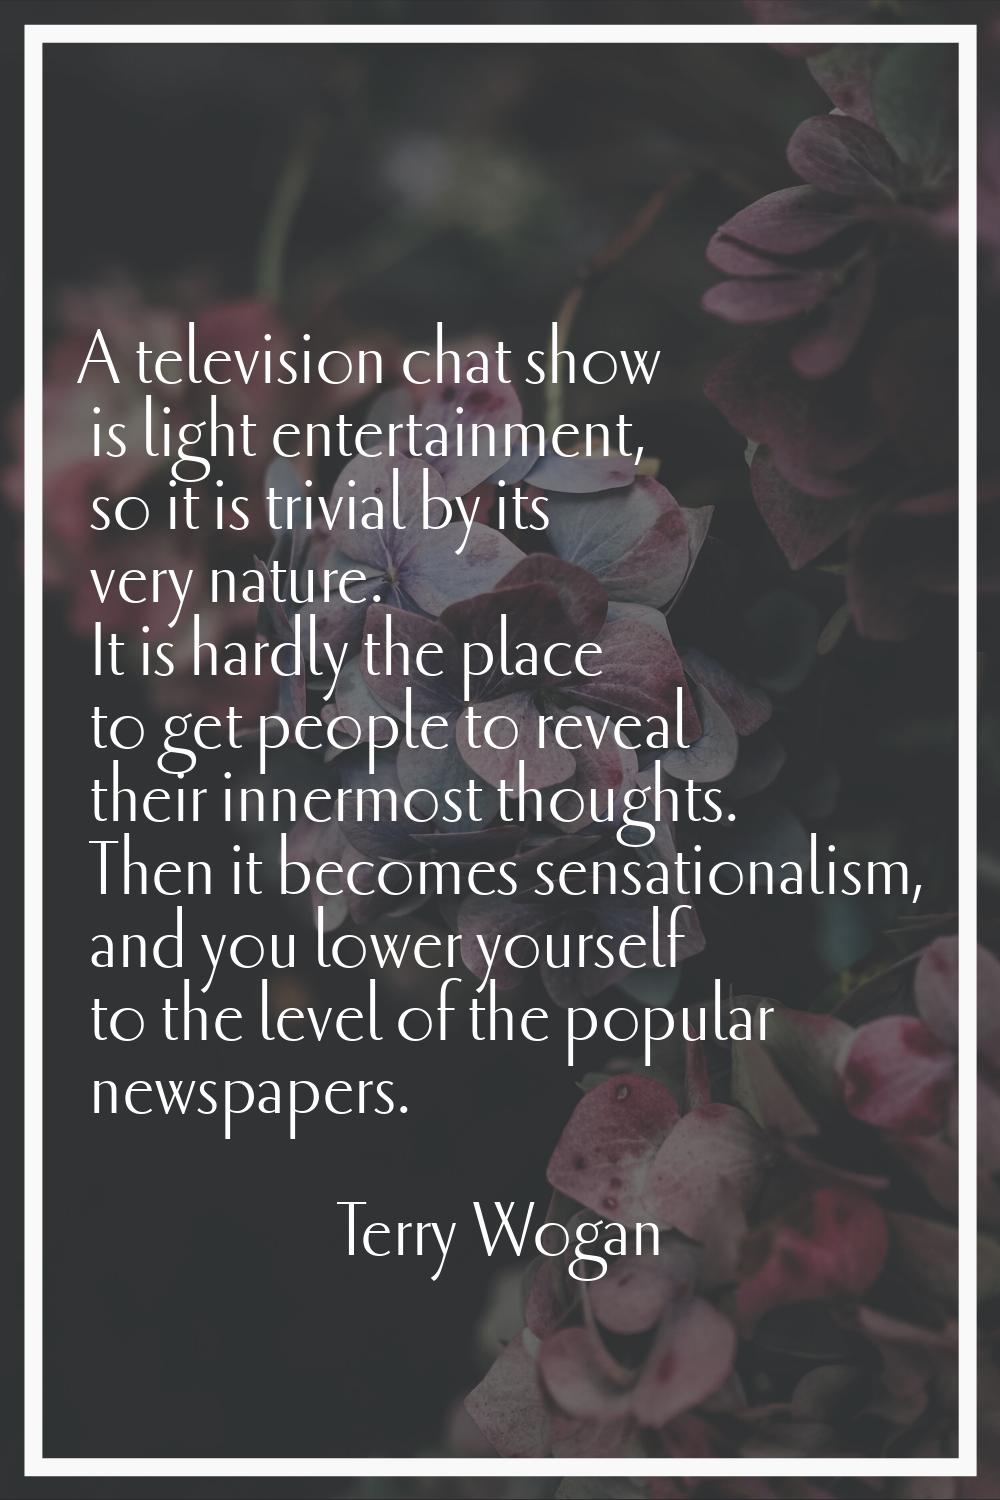 A television chat show is light entertainment, so it is trivial by its very nature. It is hardly th